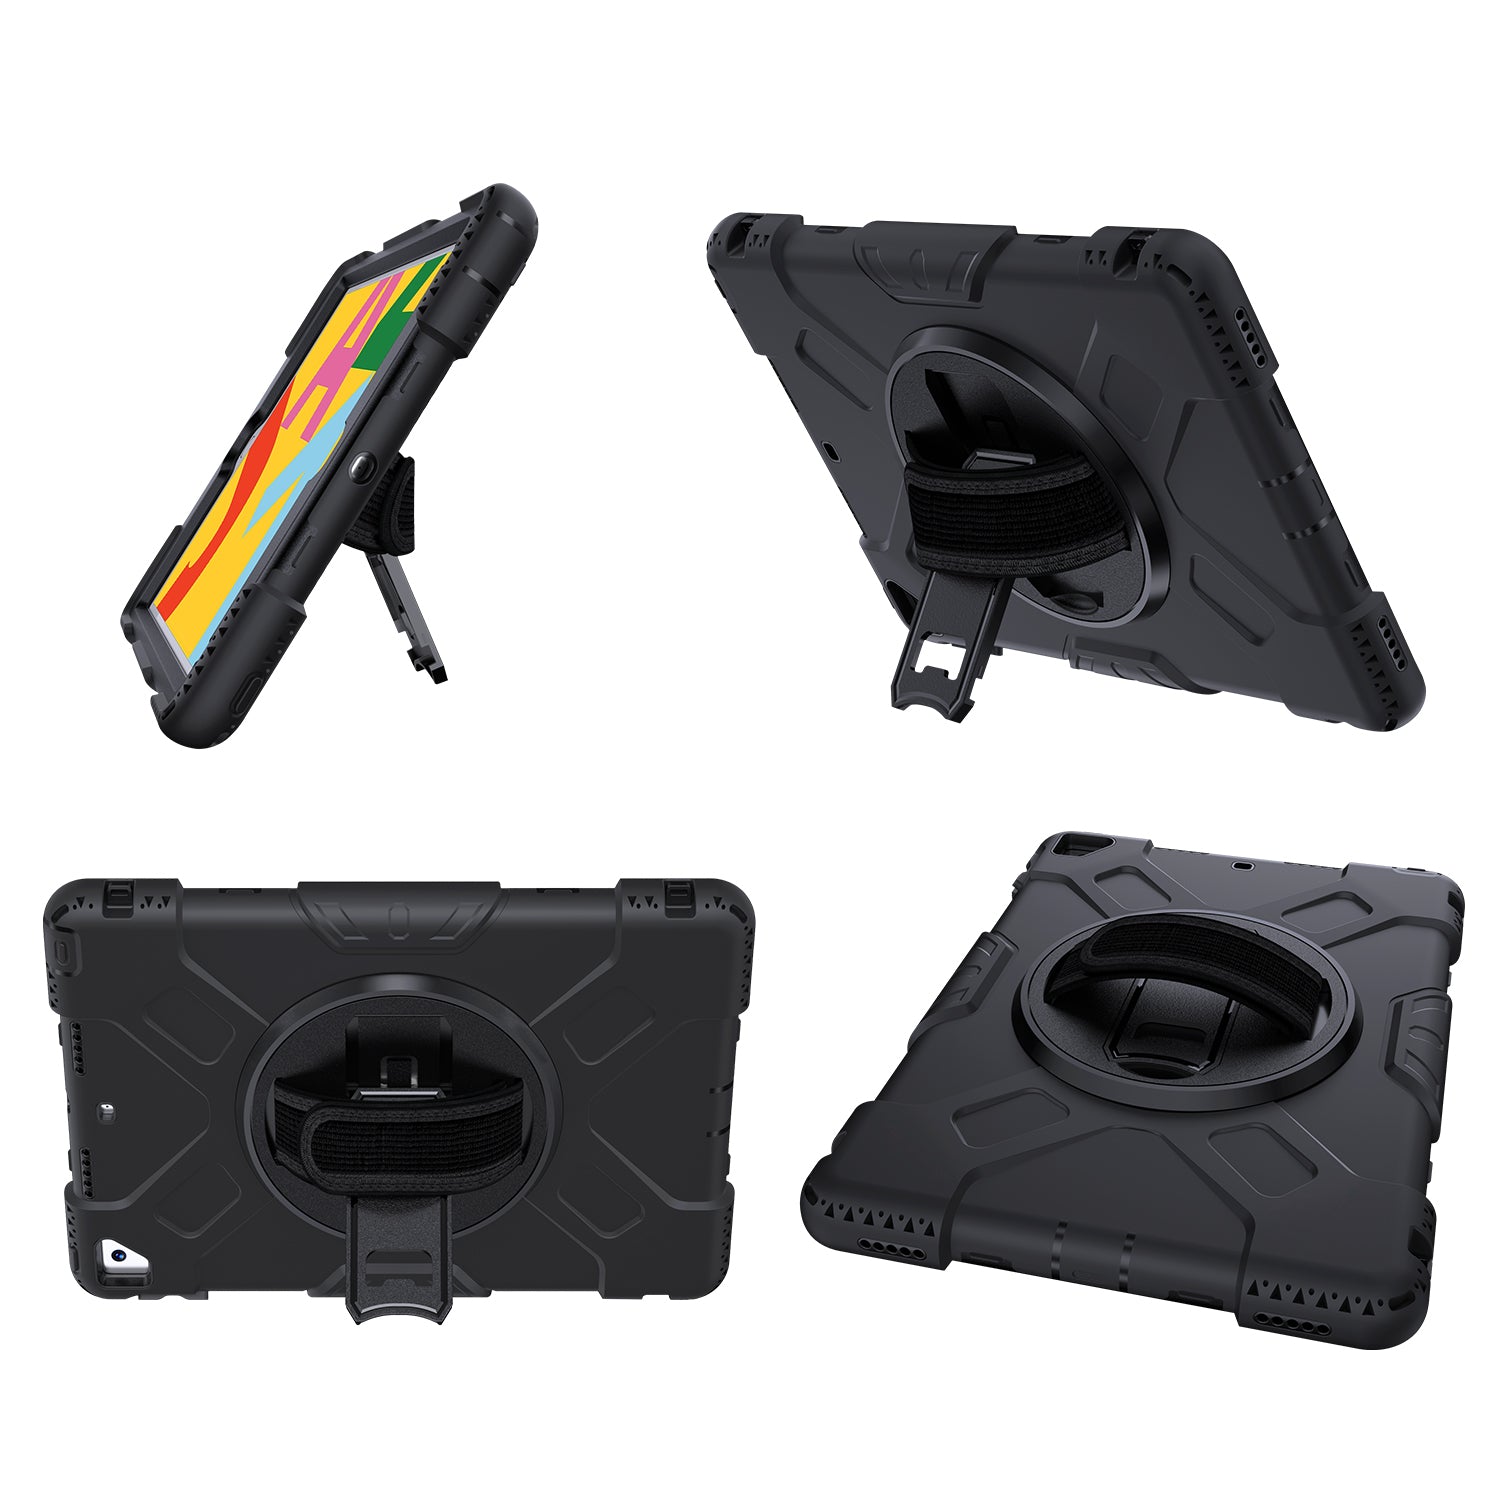 Tough On iPad 7 / 8 / 9th Gen 10.2" Case Rugged Protection Black